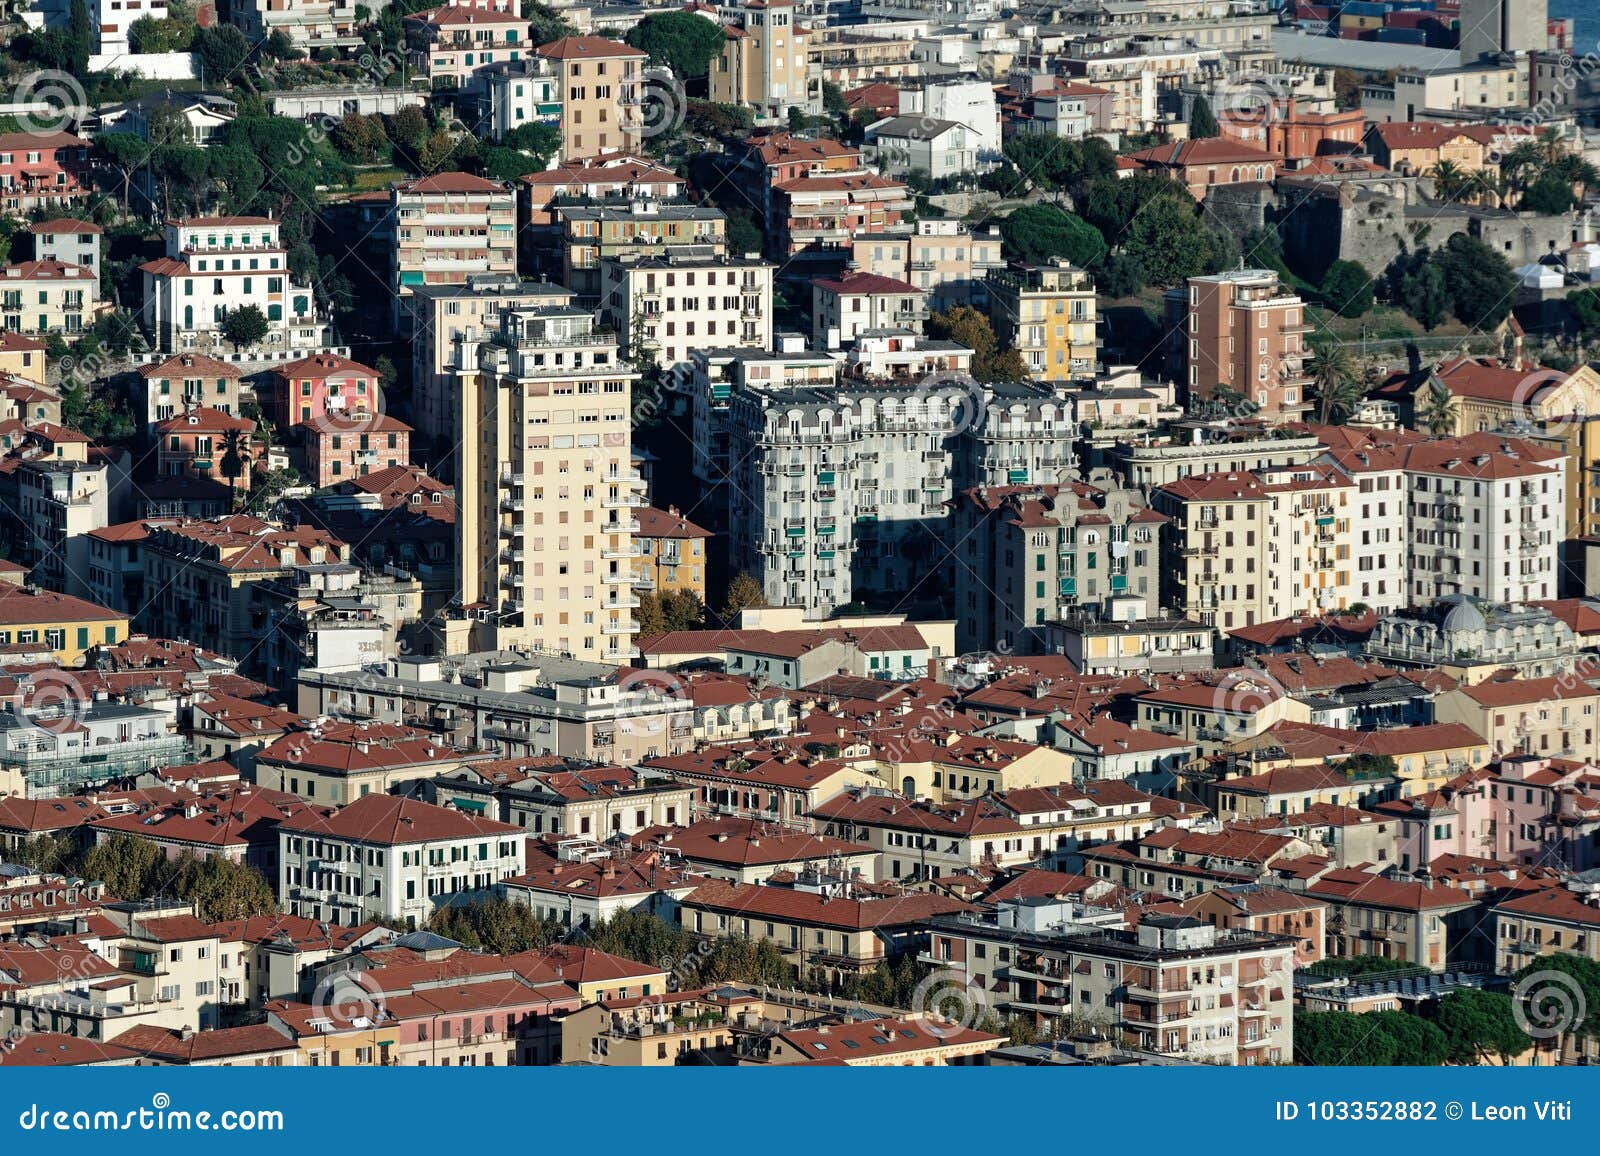 aerialview of la spezia from a hill